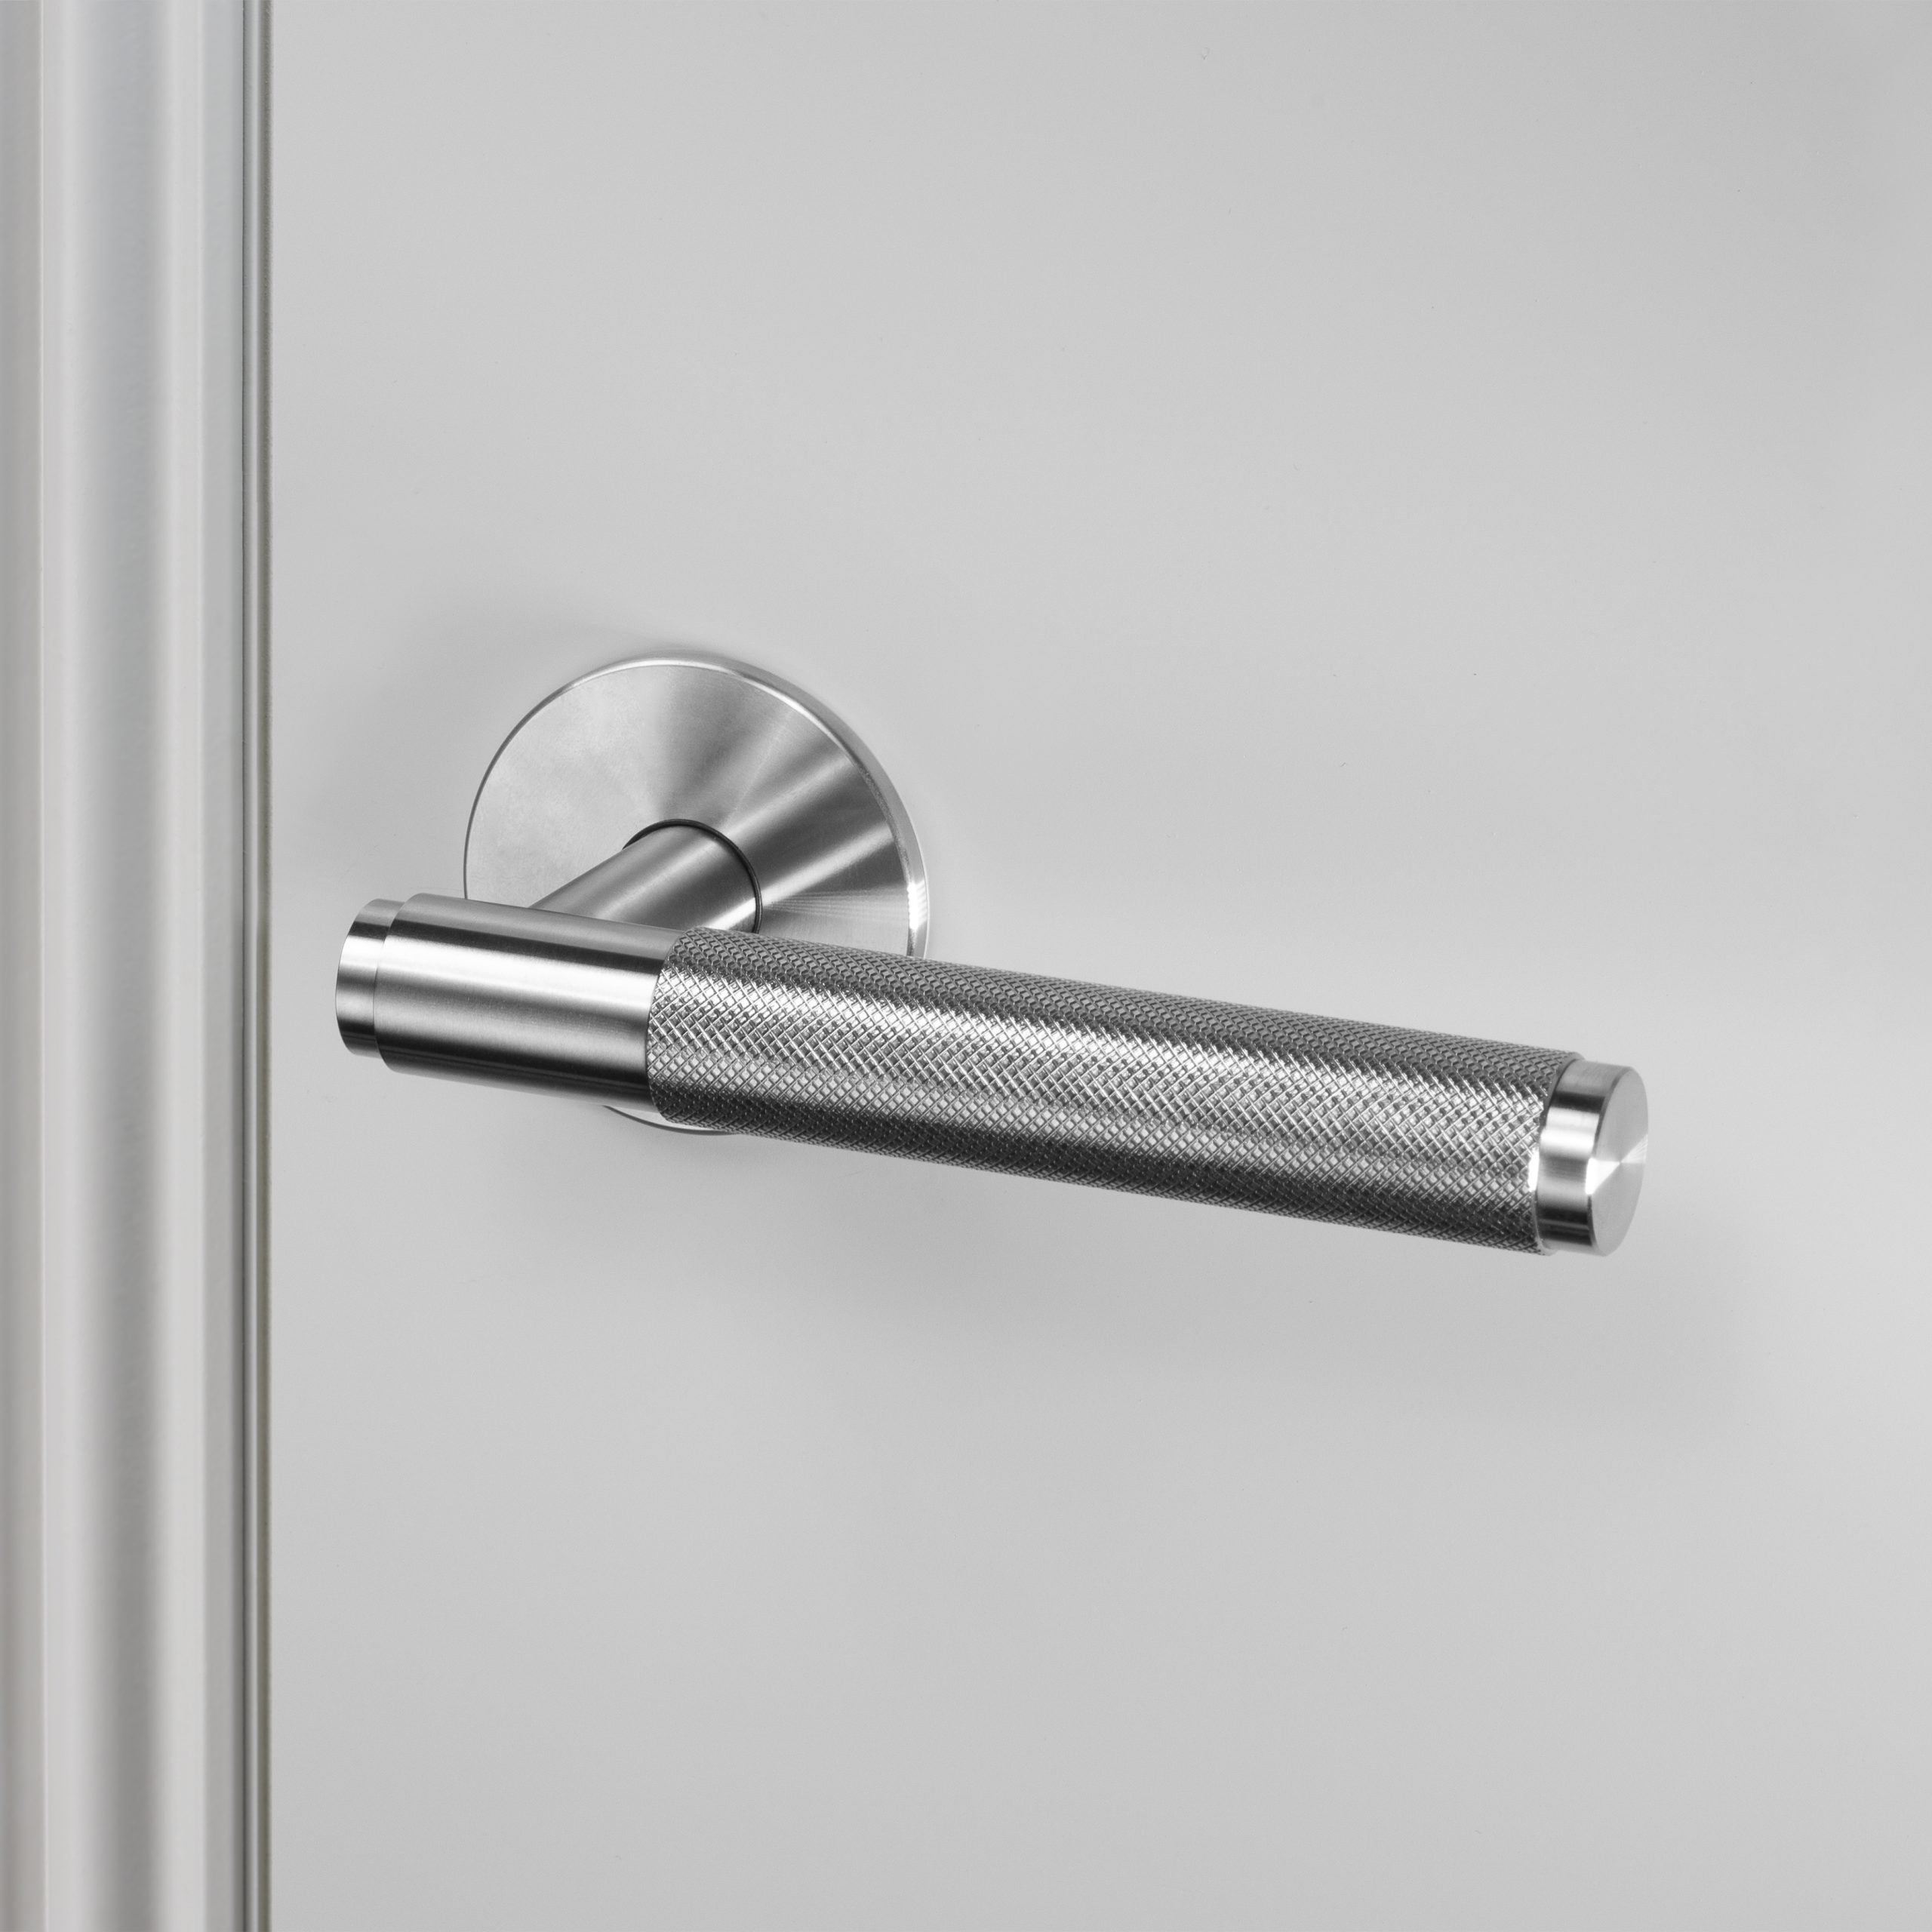 Buster + Punch Conventional Door Handle, Cross Design - FIXED TYPE Hardware Buster + Punch Steel  